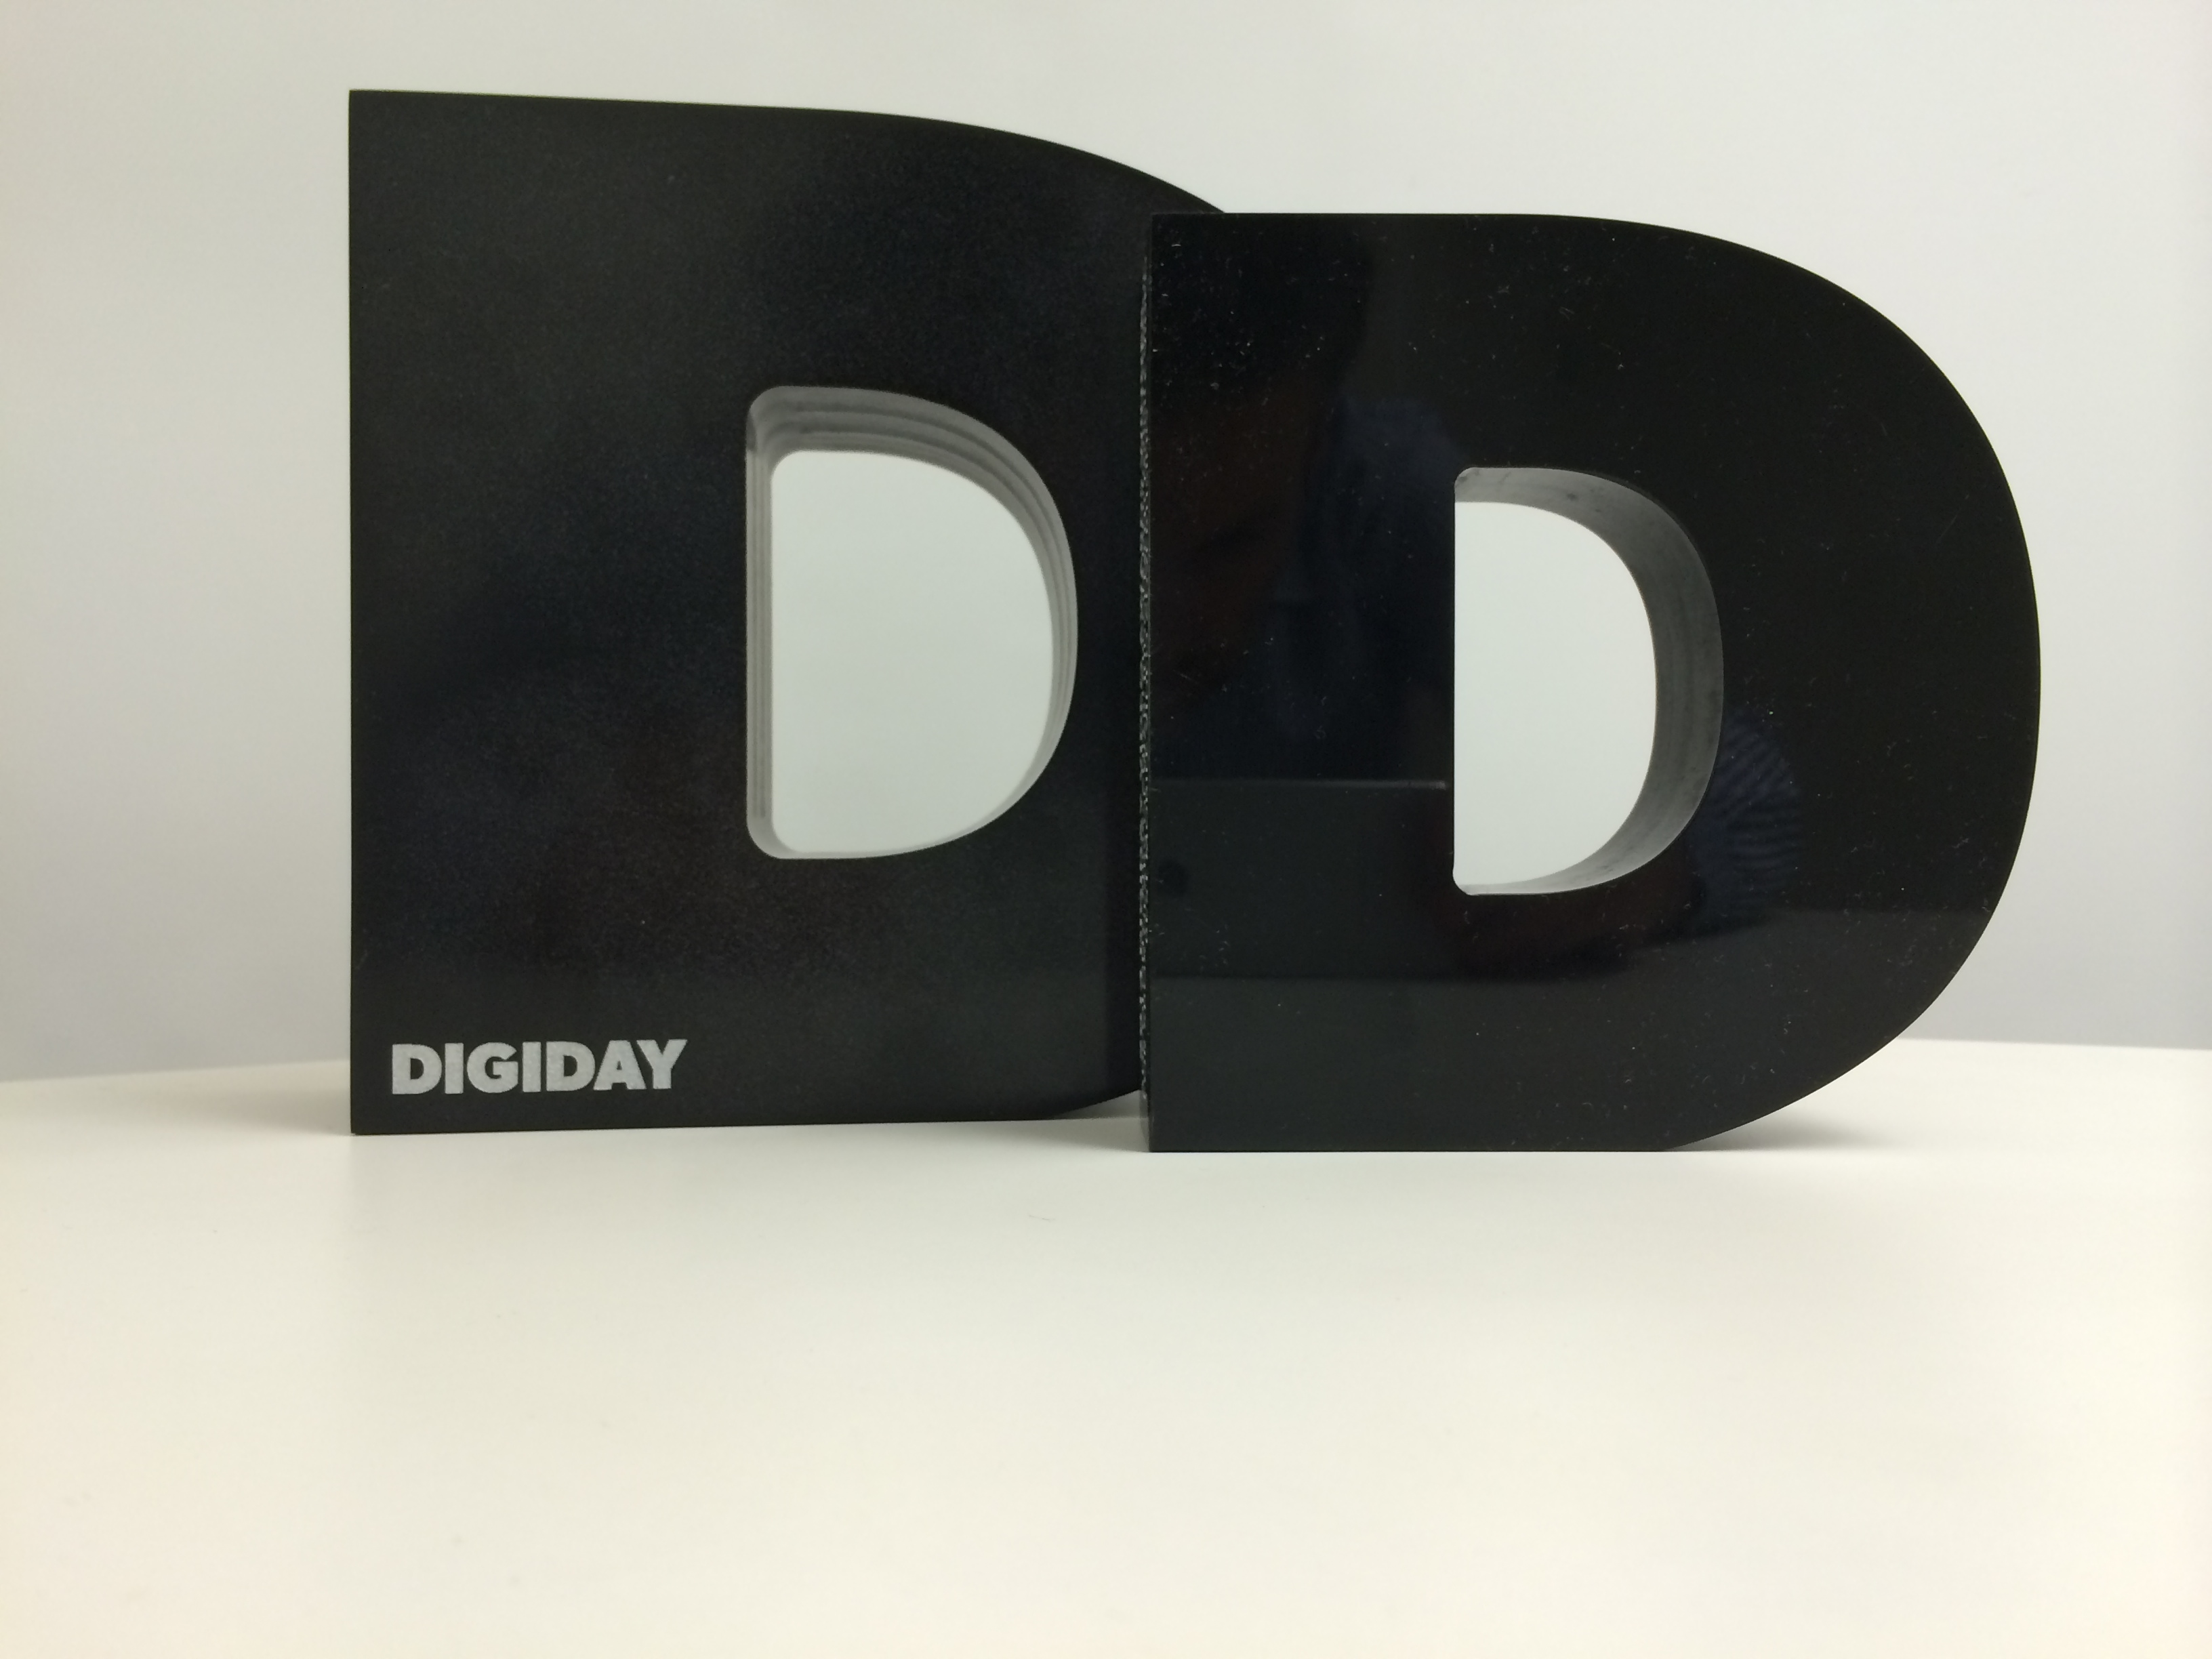 GE leads the pack of Digiday Content Marketing Awards finalists Digiday